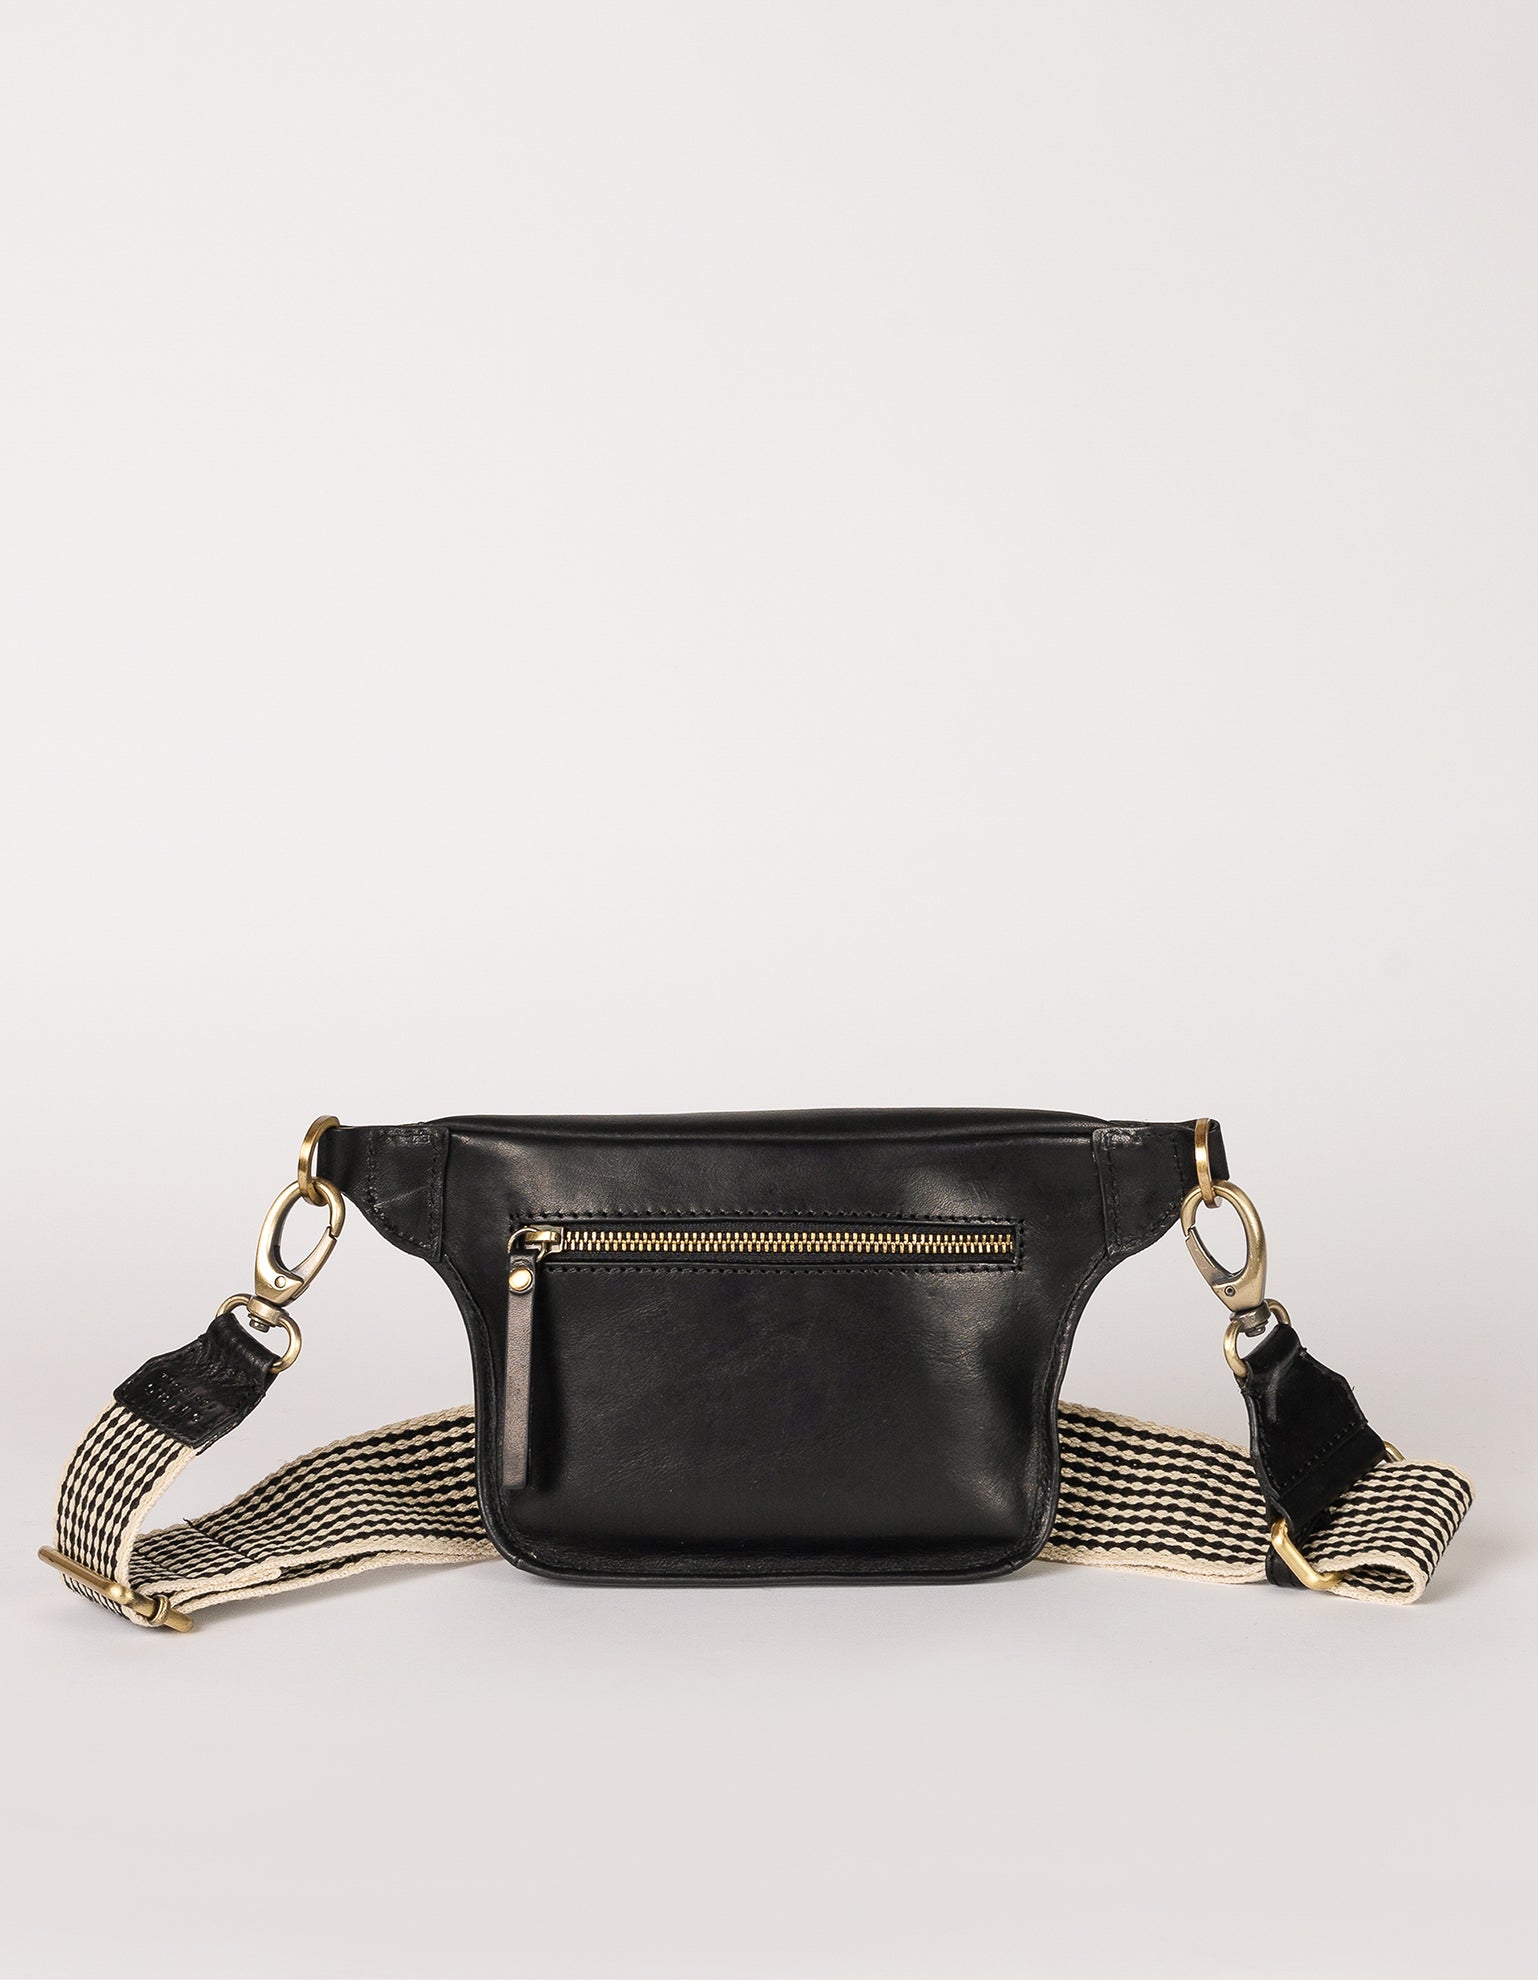 Black Leather womens fanny pack. Square shape with an adjustable strap. Back product image